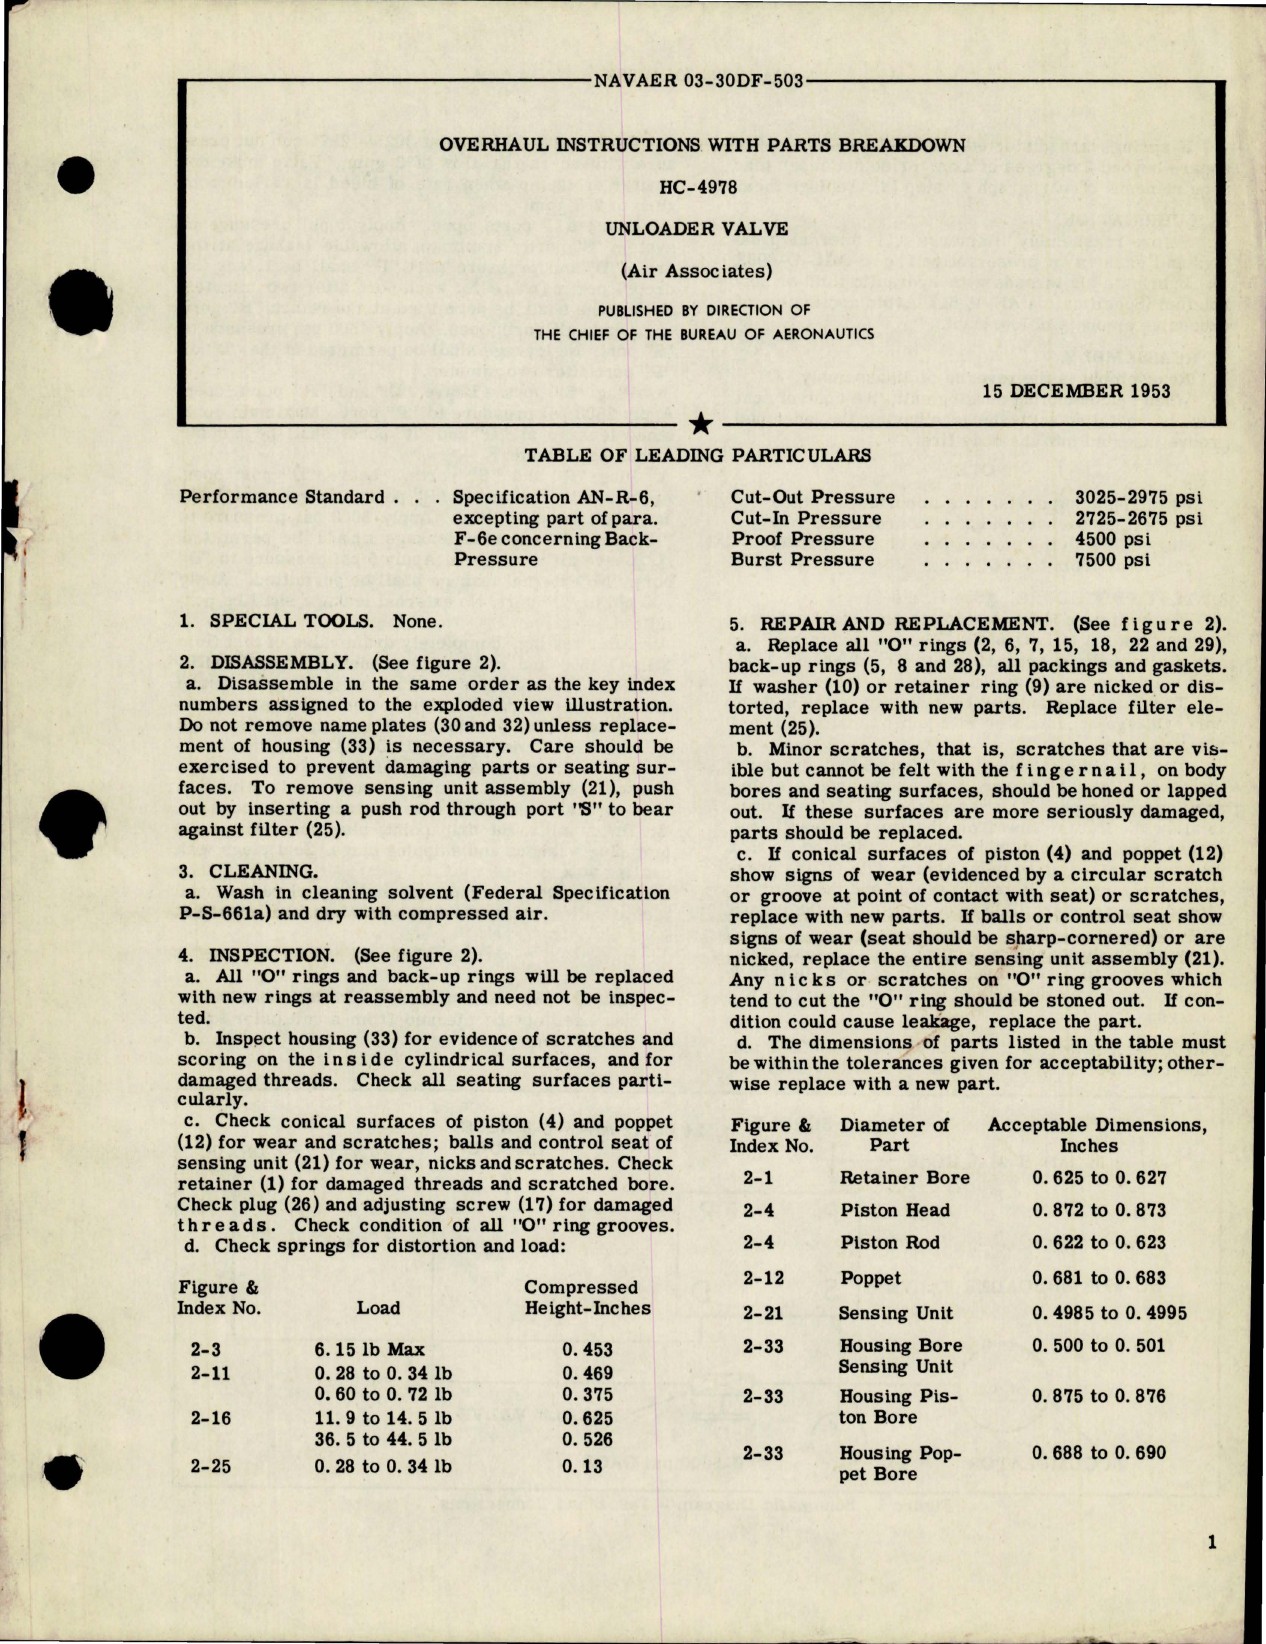 Sample page 1 from AirCorps Library document: Overhaul Instructions with Parts Breakdown for Unloader Valve HC-4978 